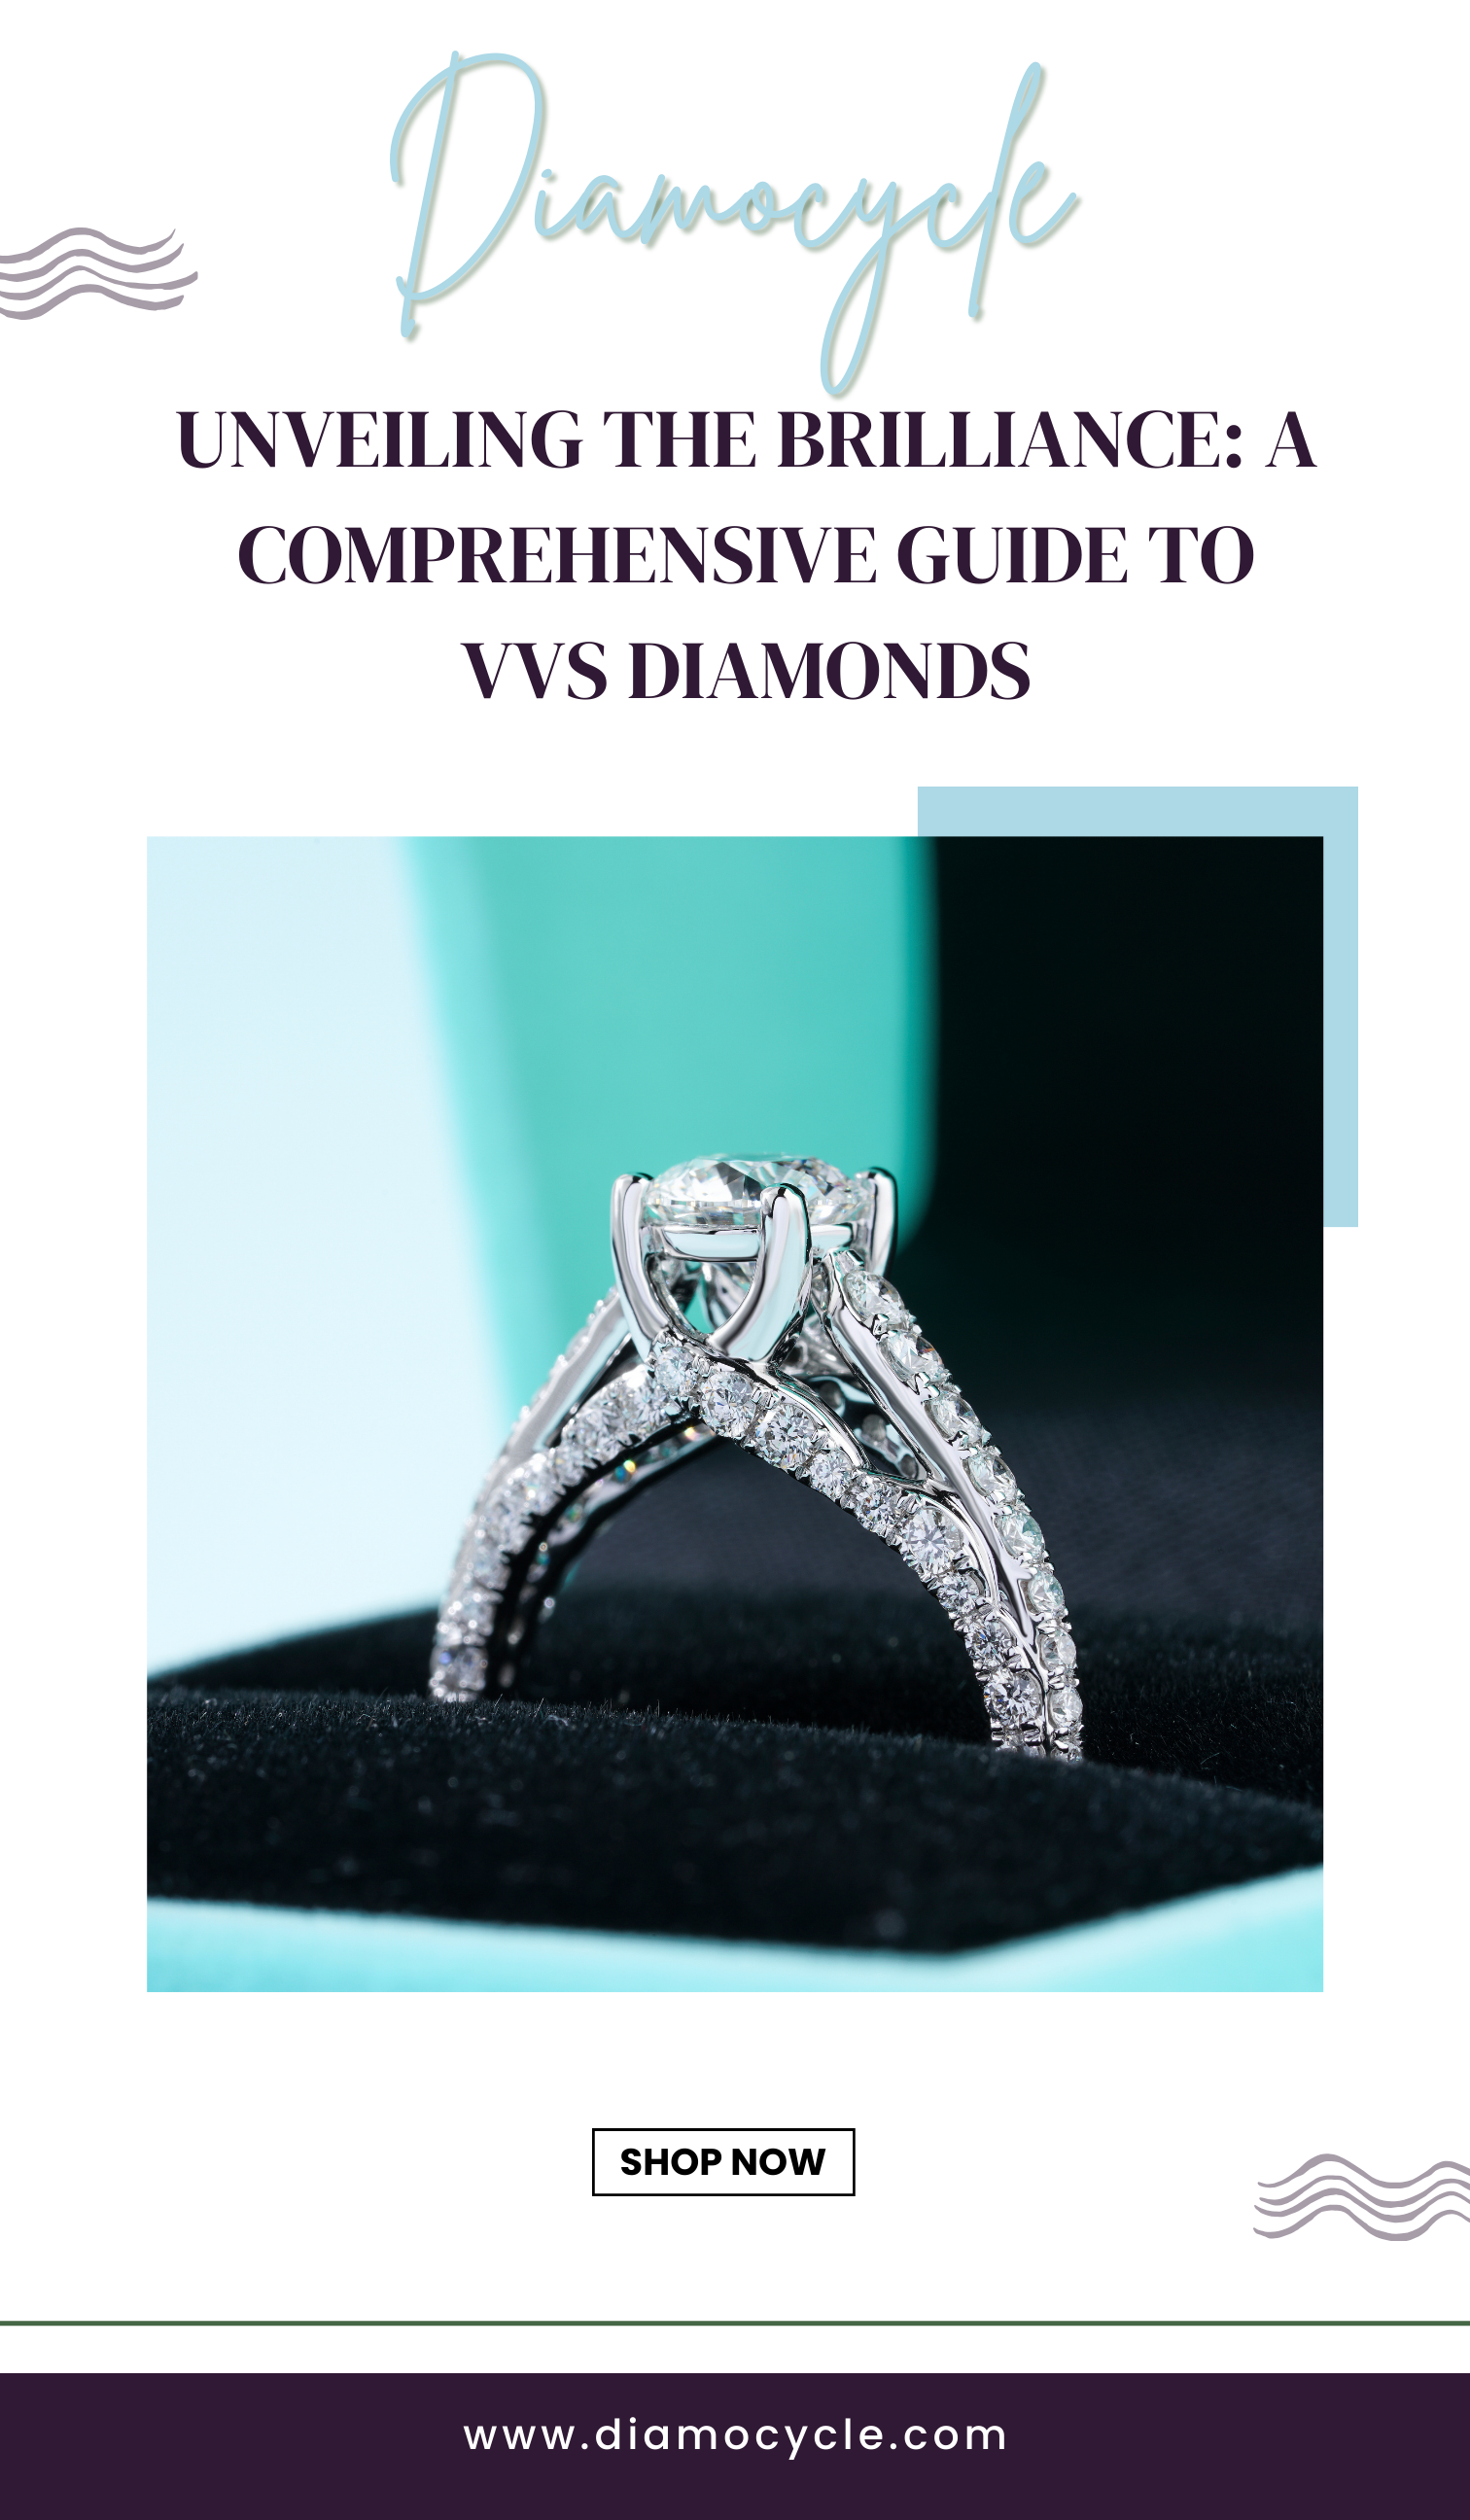 Unveiling the Brilliance: A Comprehensive Guide to VVS Diamonds